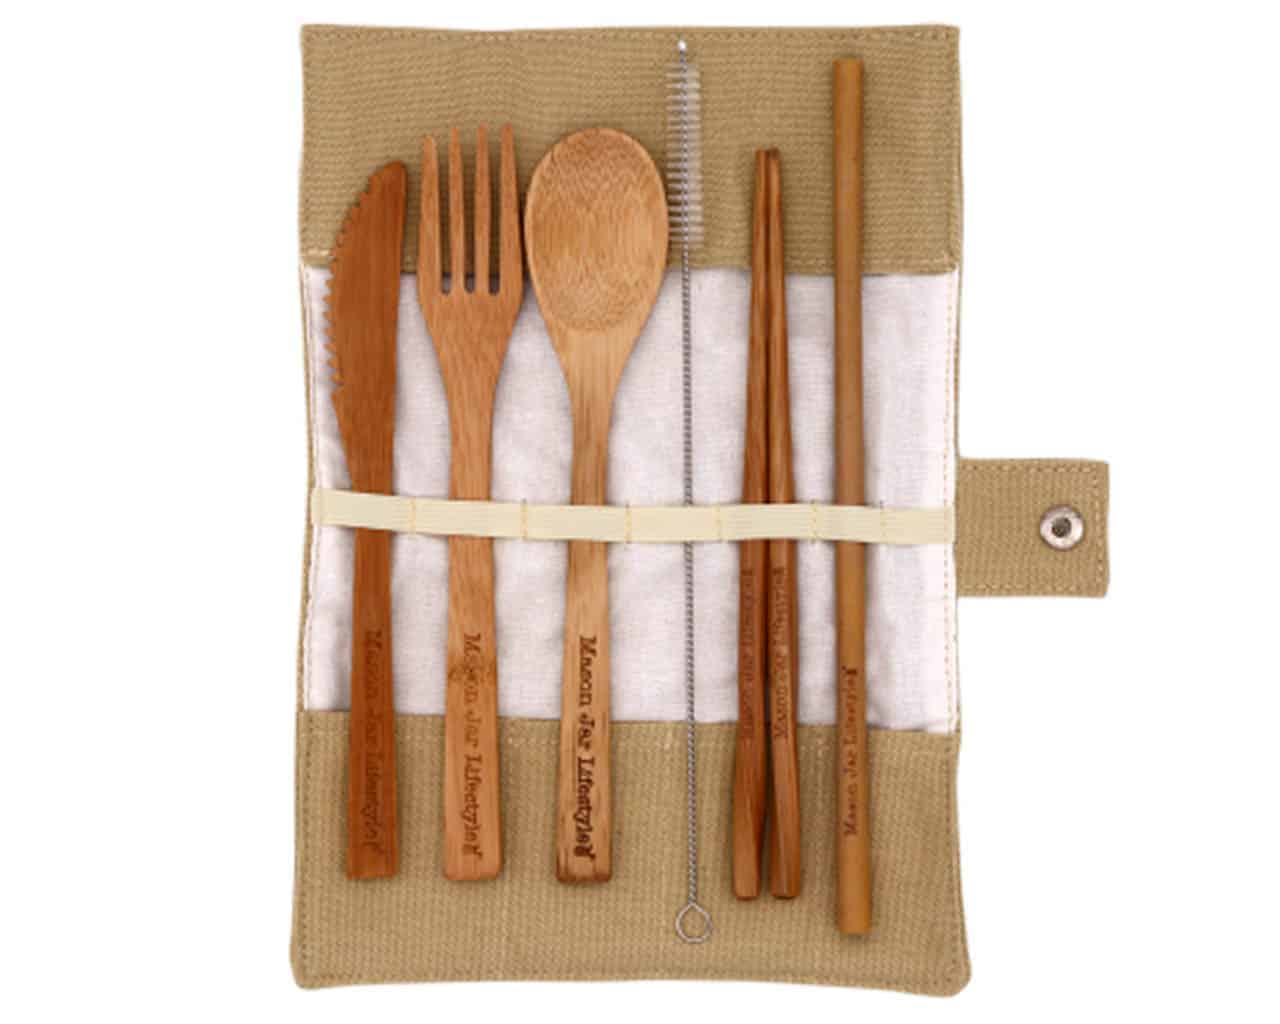 Bamboo Utensils Reusable Cutlery Travel Set Eco-friendly Wooden